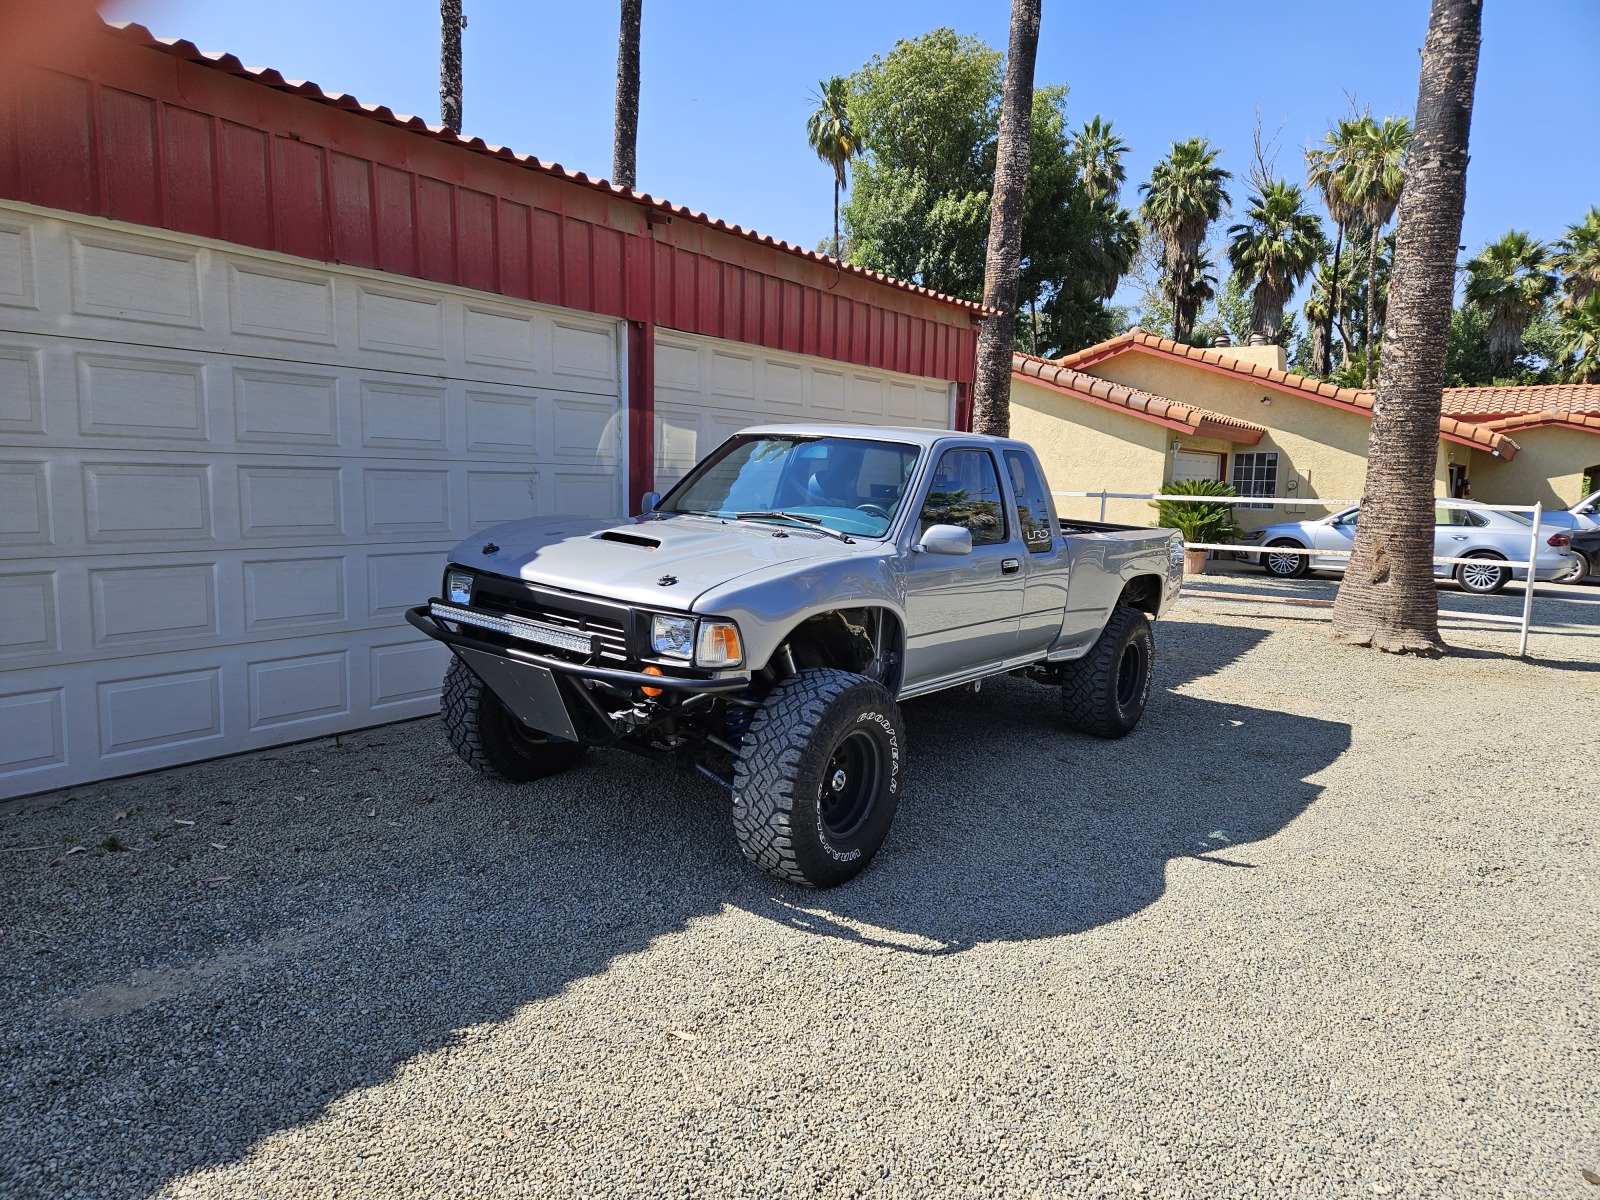 For Sale: 91 Toyota Pickup 4x4 Long Travel, 3.4 Swap Supercharger - photo0